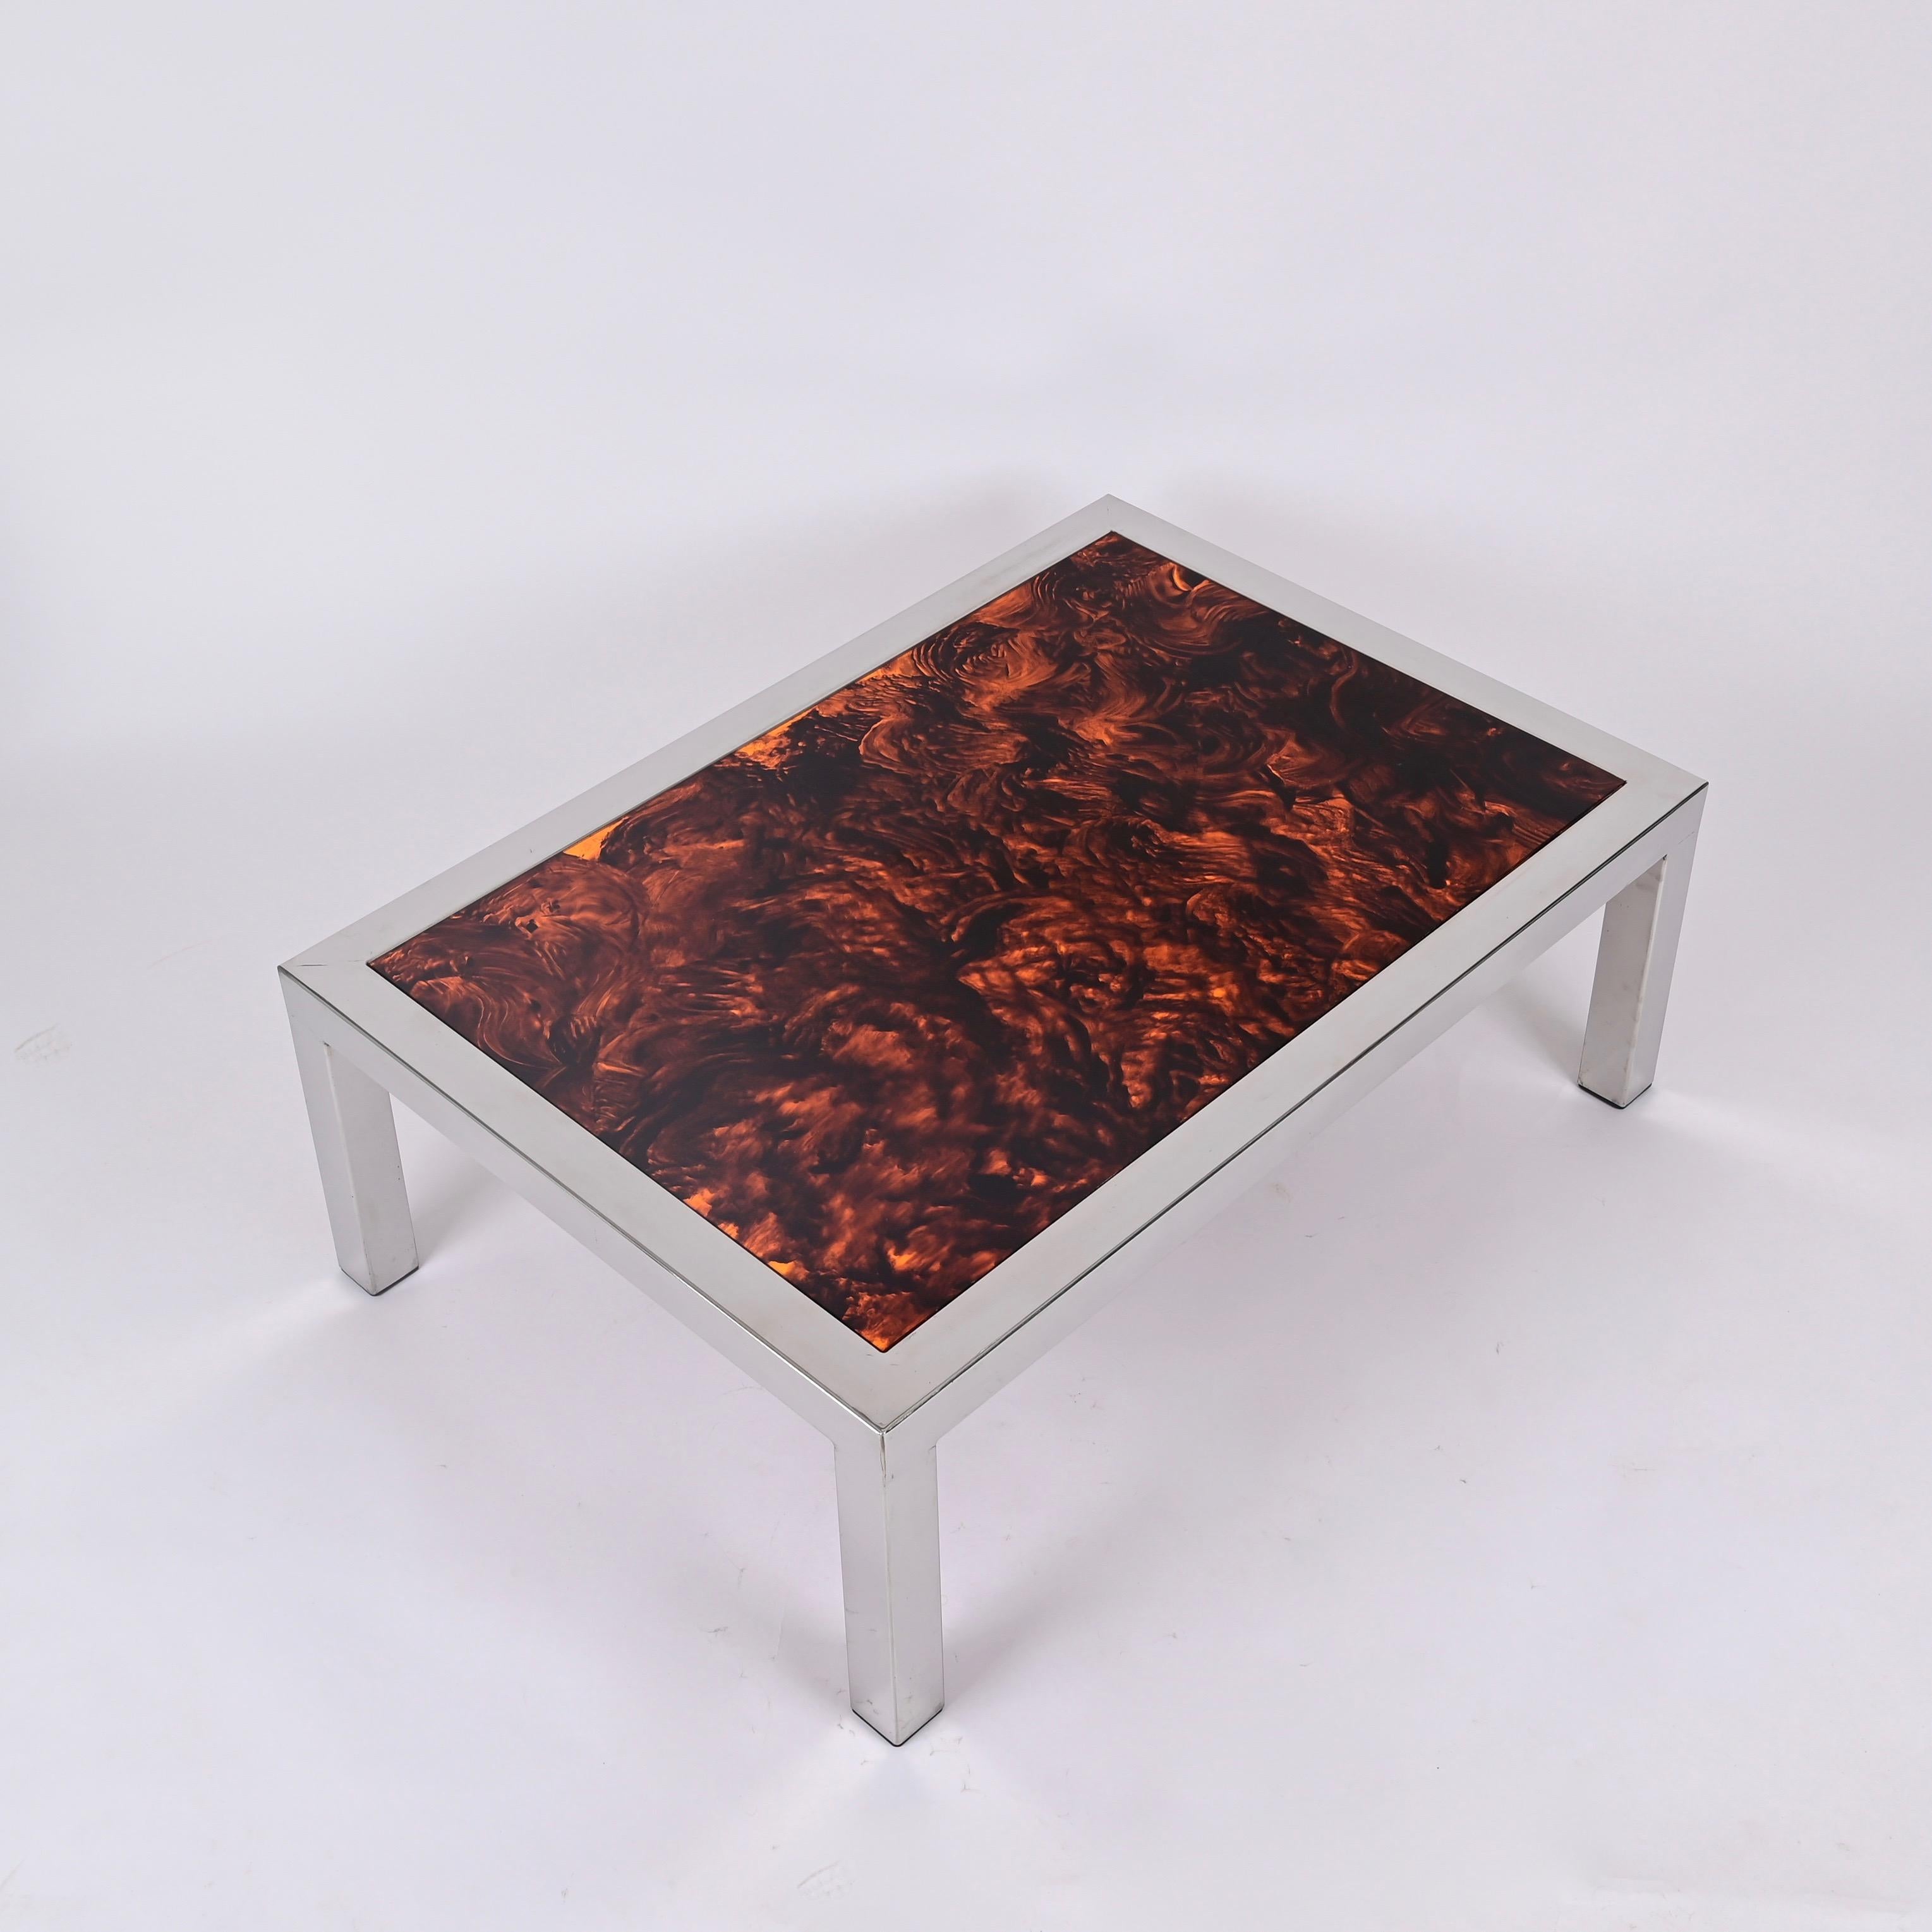 Late 20th Century Chromed Steel and Tortoiseshell Effect Lucite Coffee Table, Italy 1970s For Sale